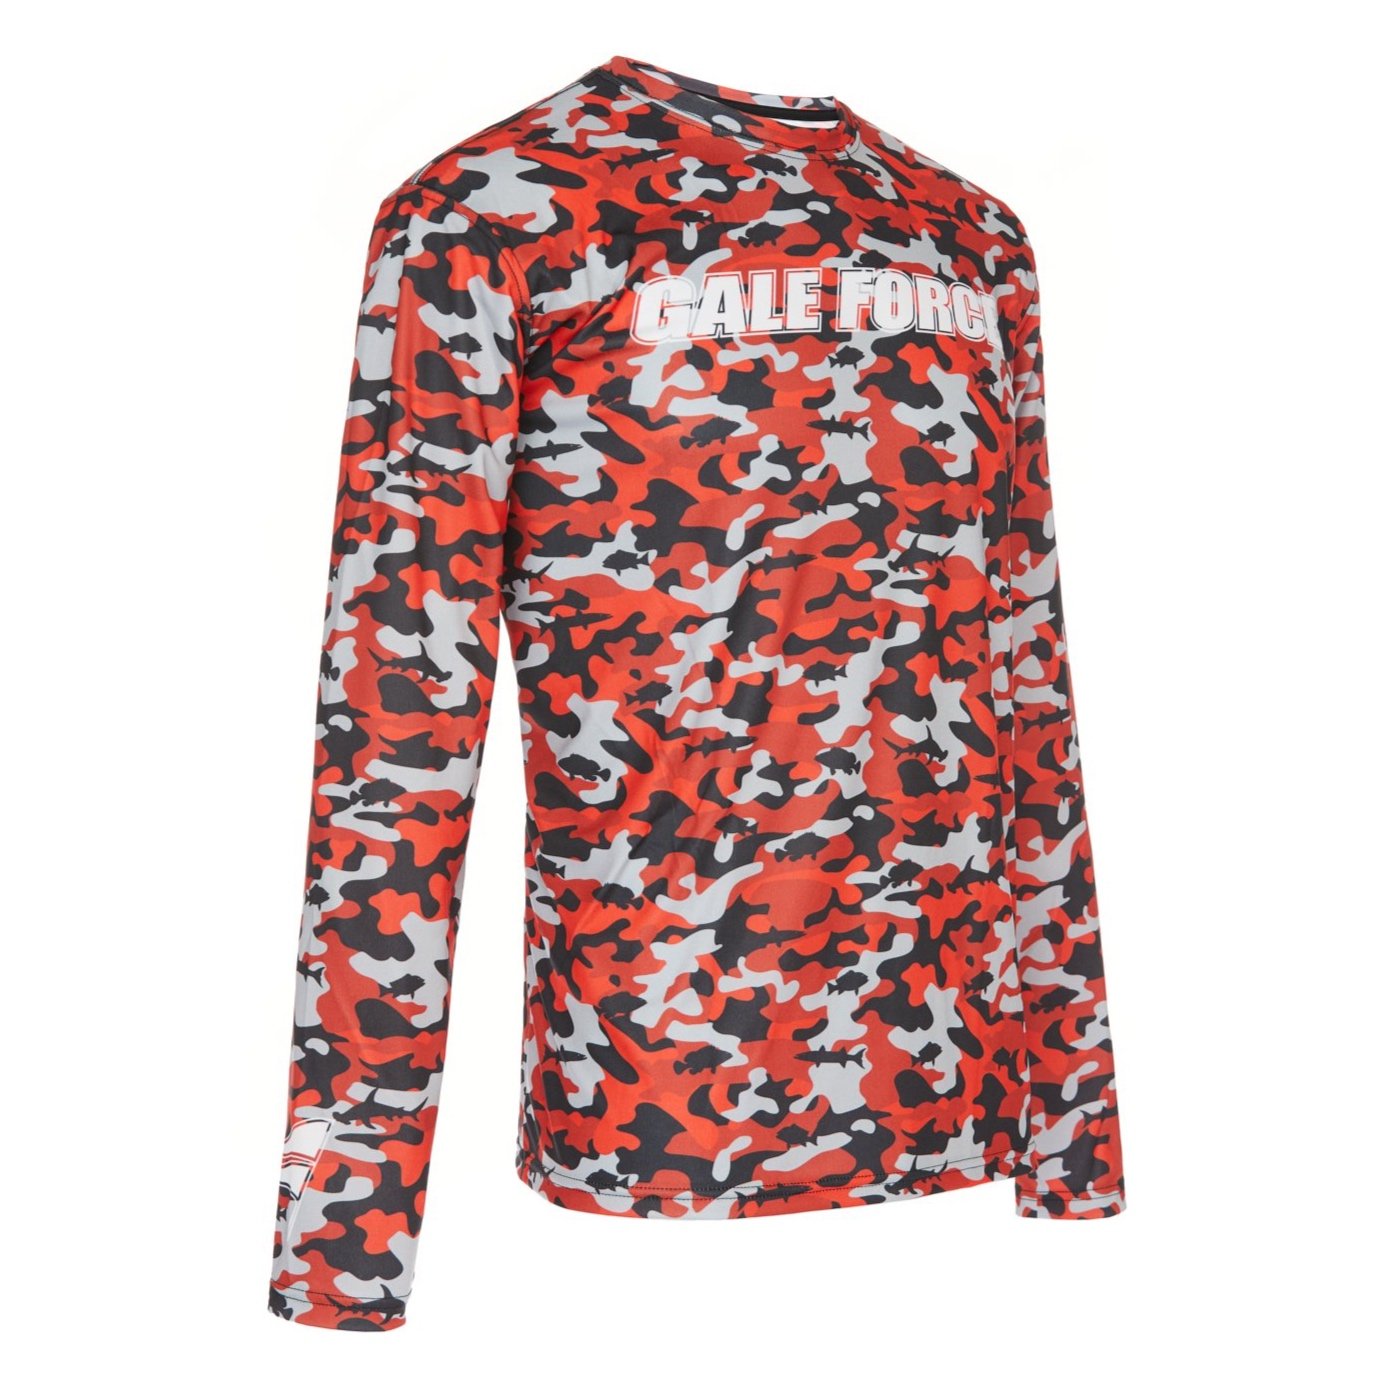 Complex officieel Initiatief Men's Red Camo Performance Shirt — Gale Force Twins